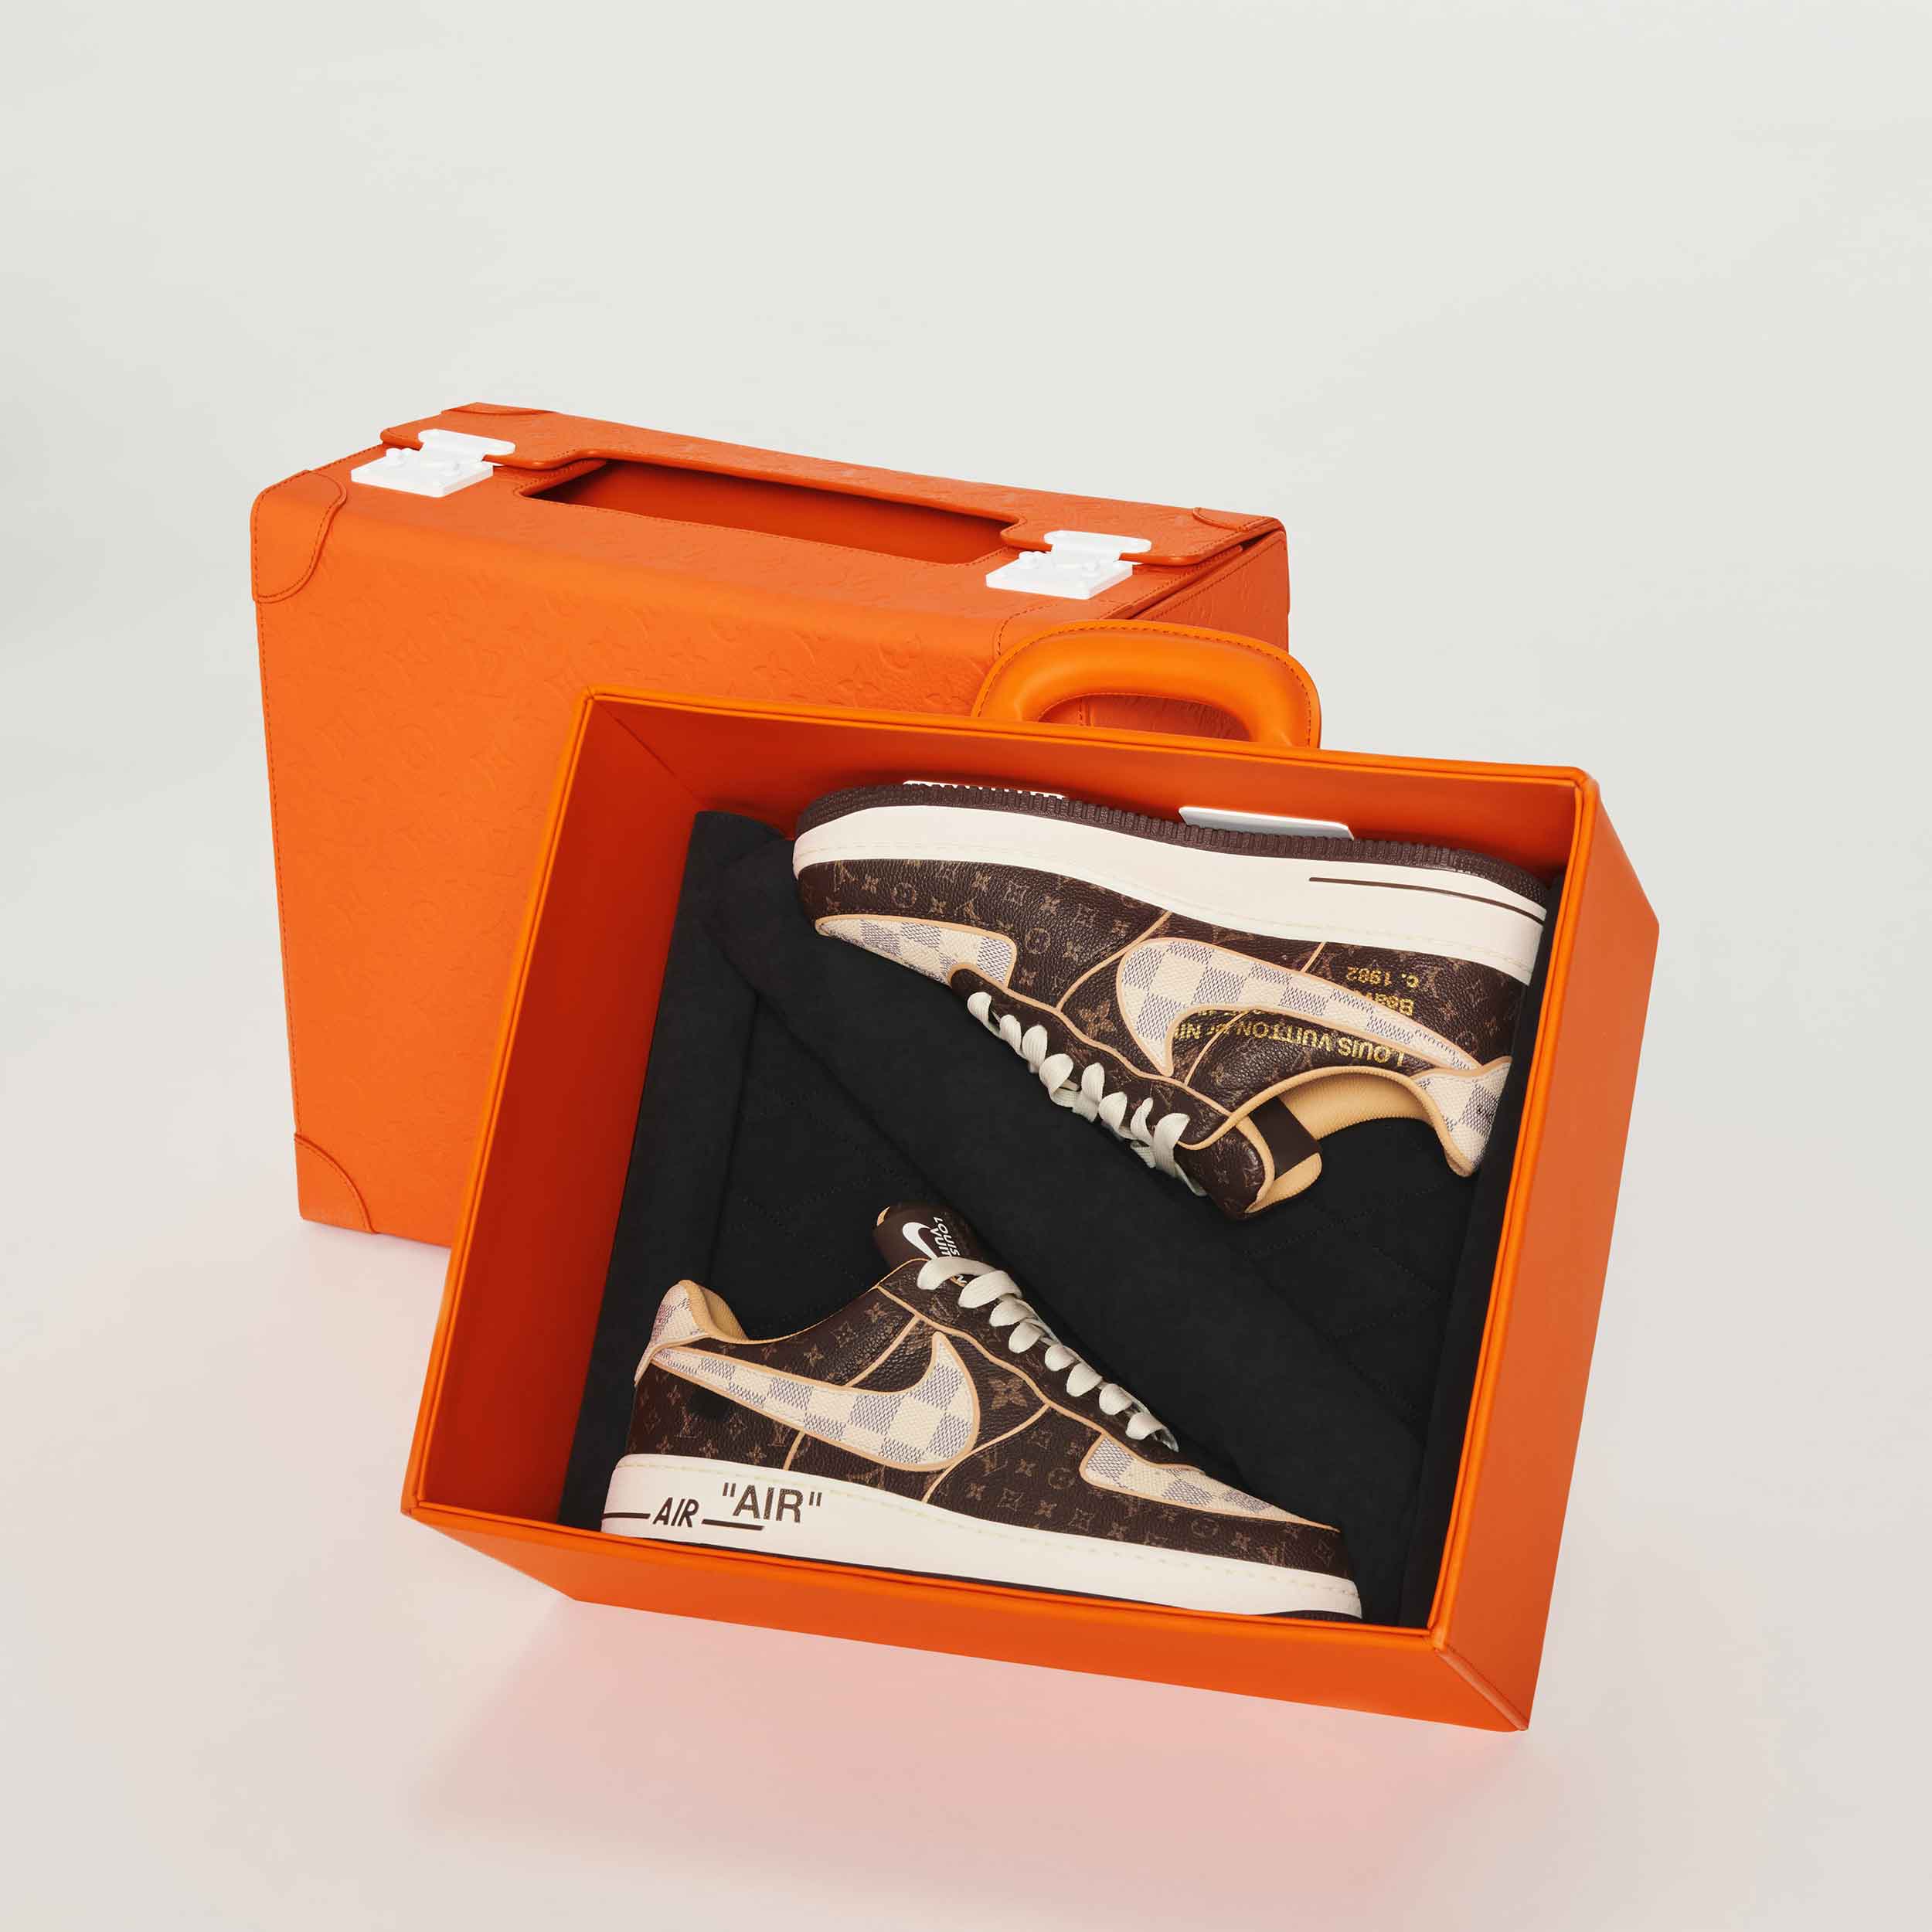 Virgil Abloh limited edition sneaker collection fetch $25 million at  Sotheby's